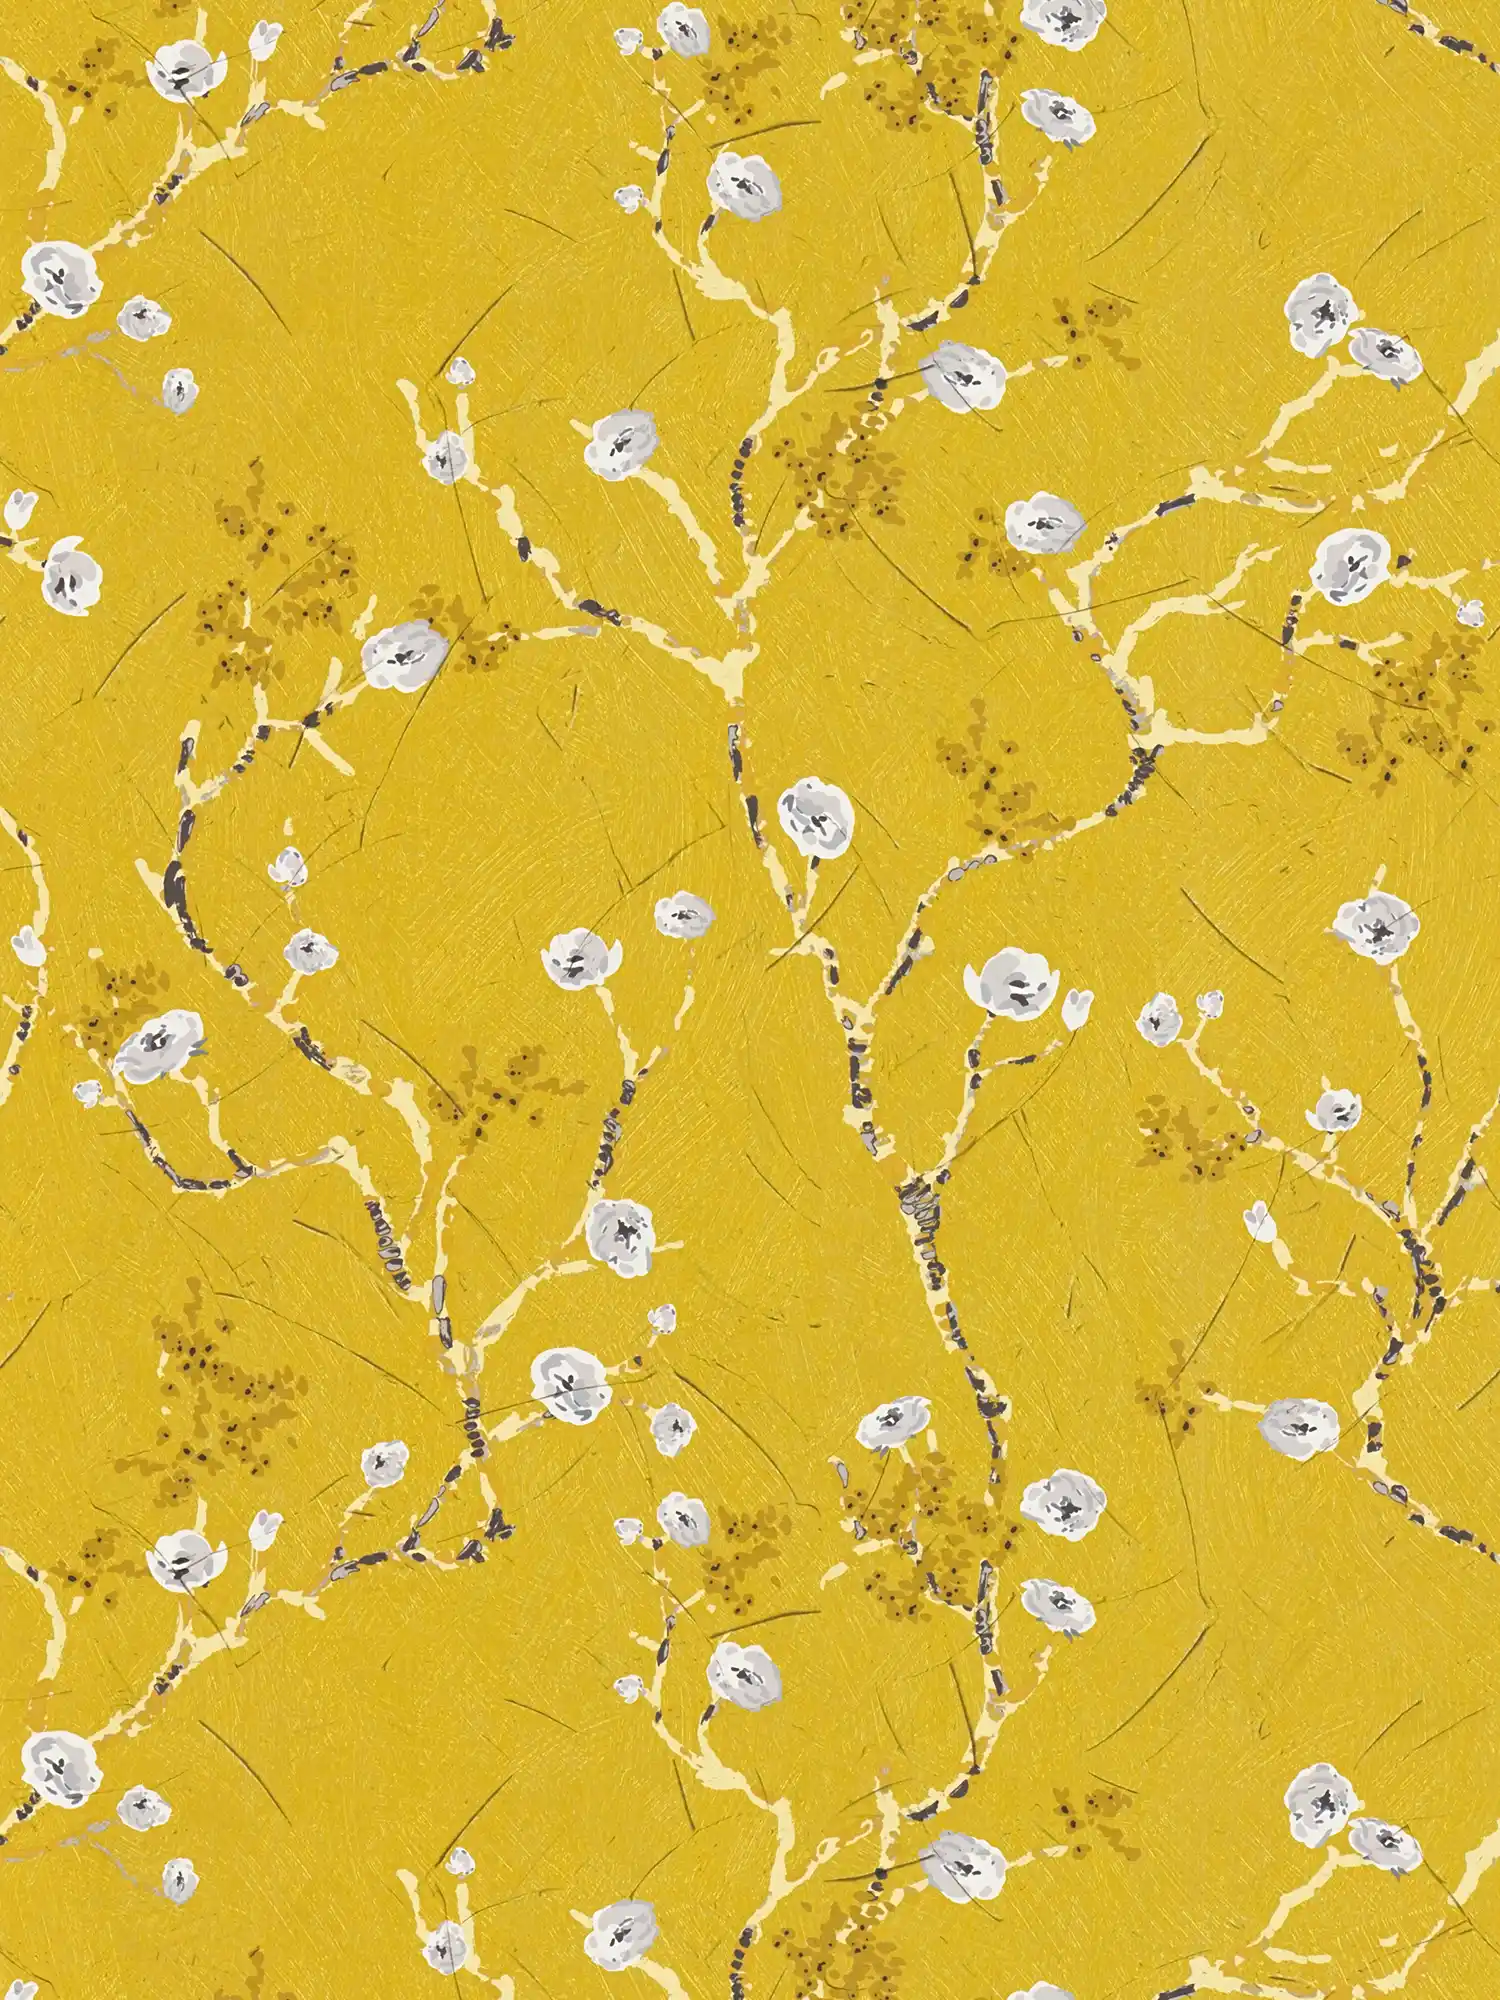 Yellow wallpaper with flowering branches in drawing style
